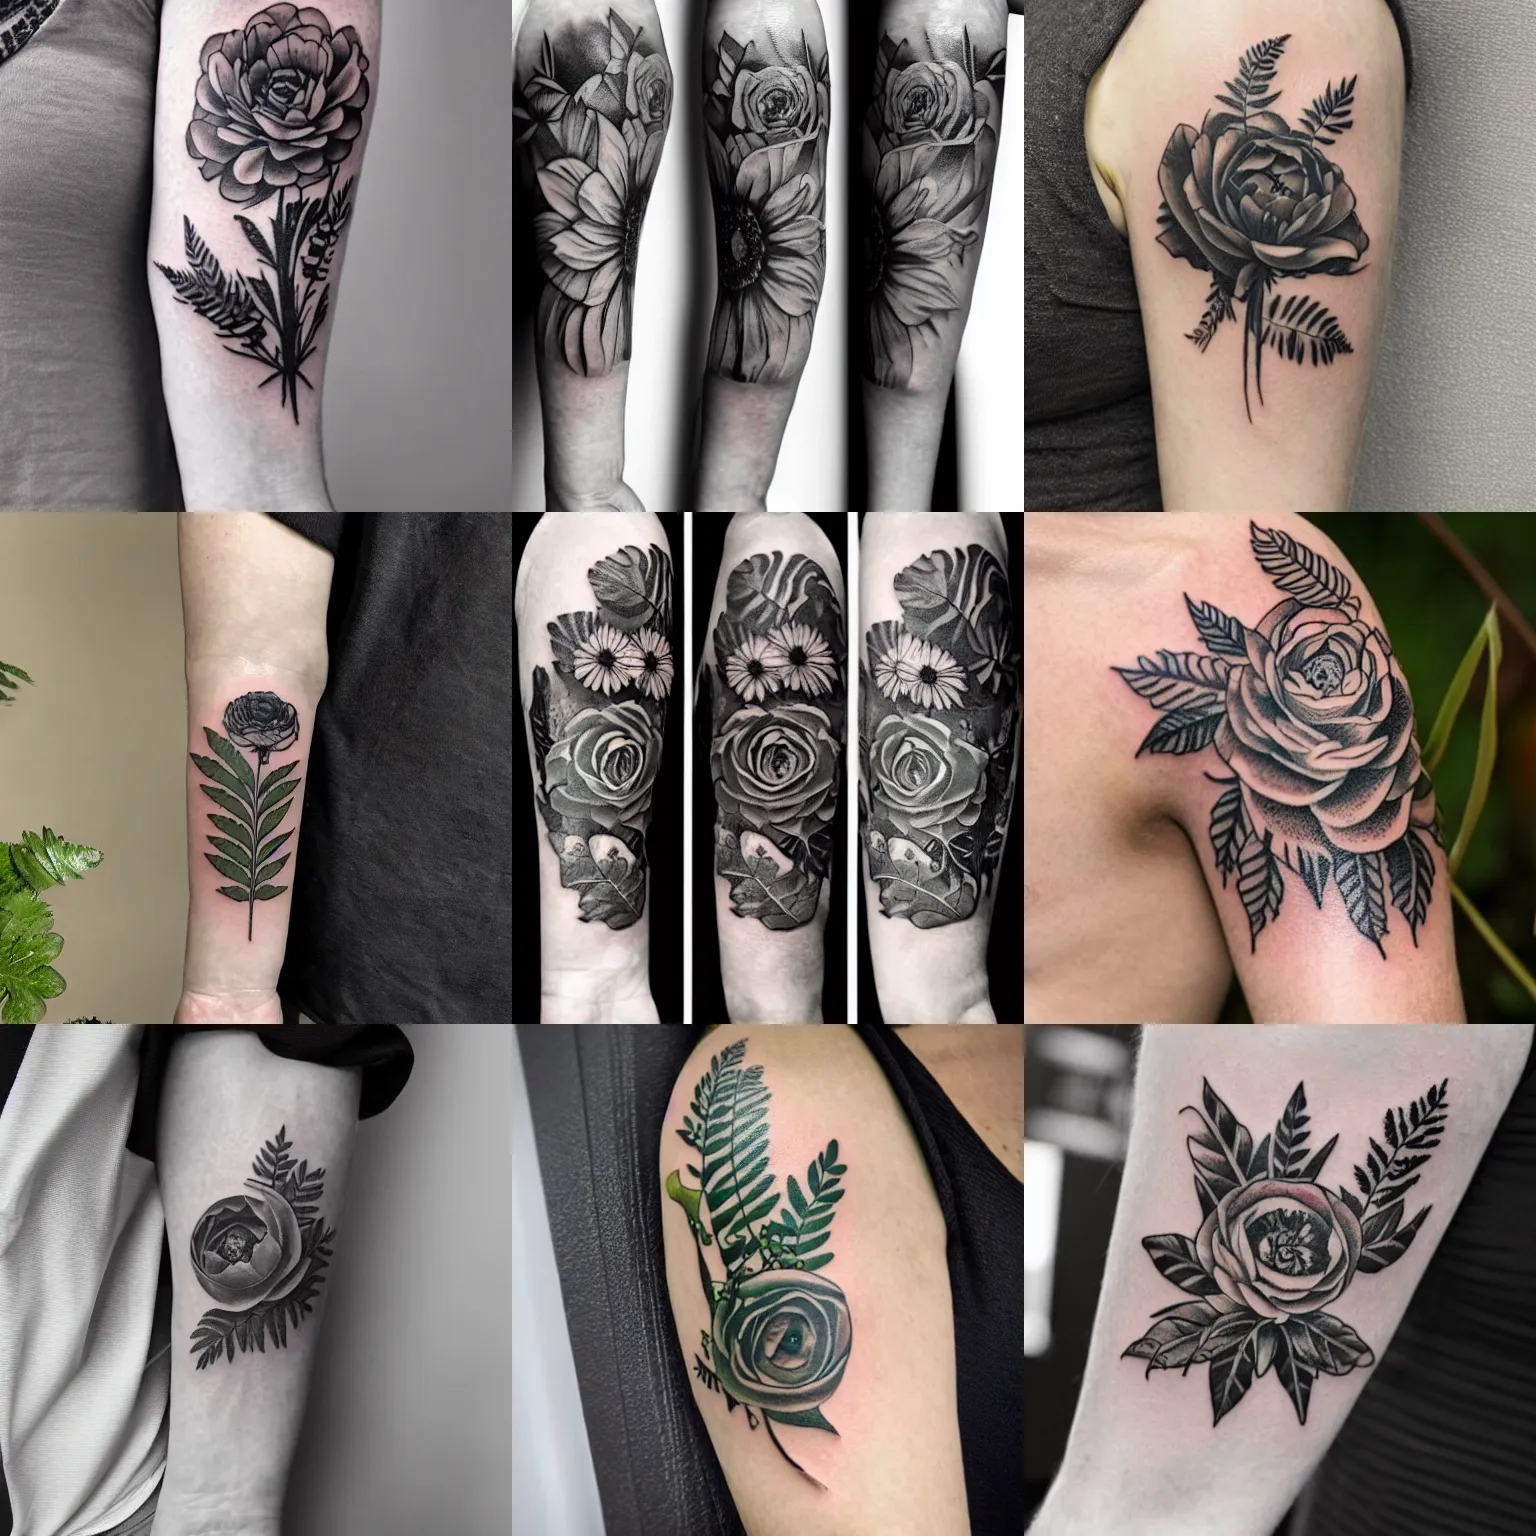 Prompt: A detailed black ink sleeve tattoo of a ranunculus flower surrounded by fern leaves